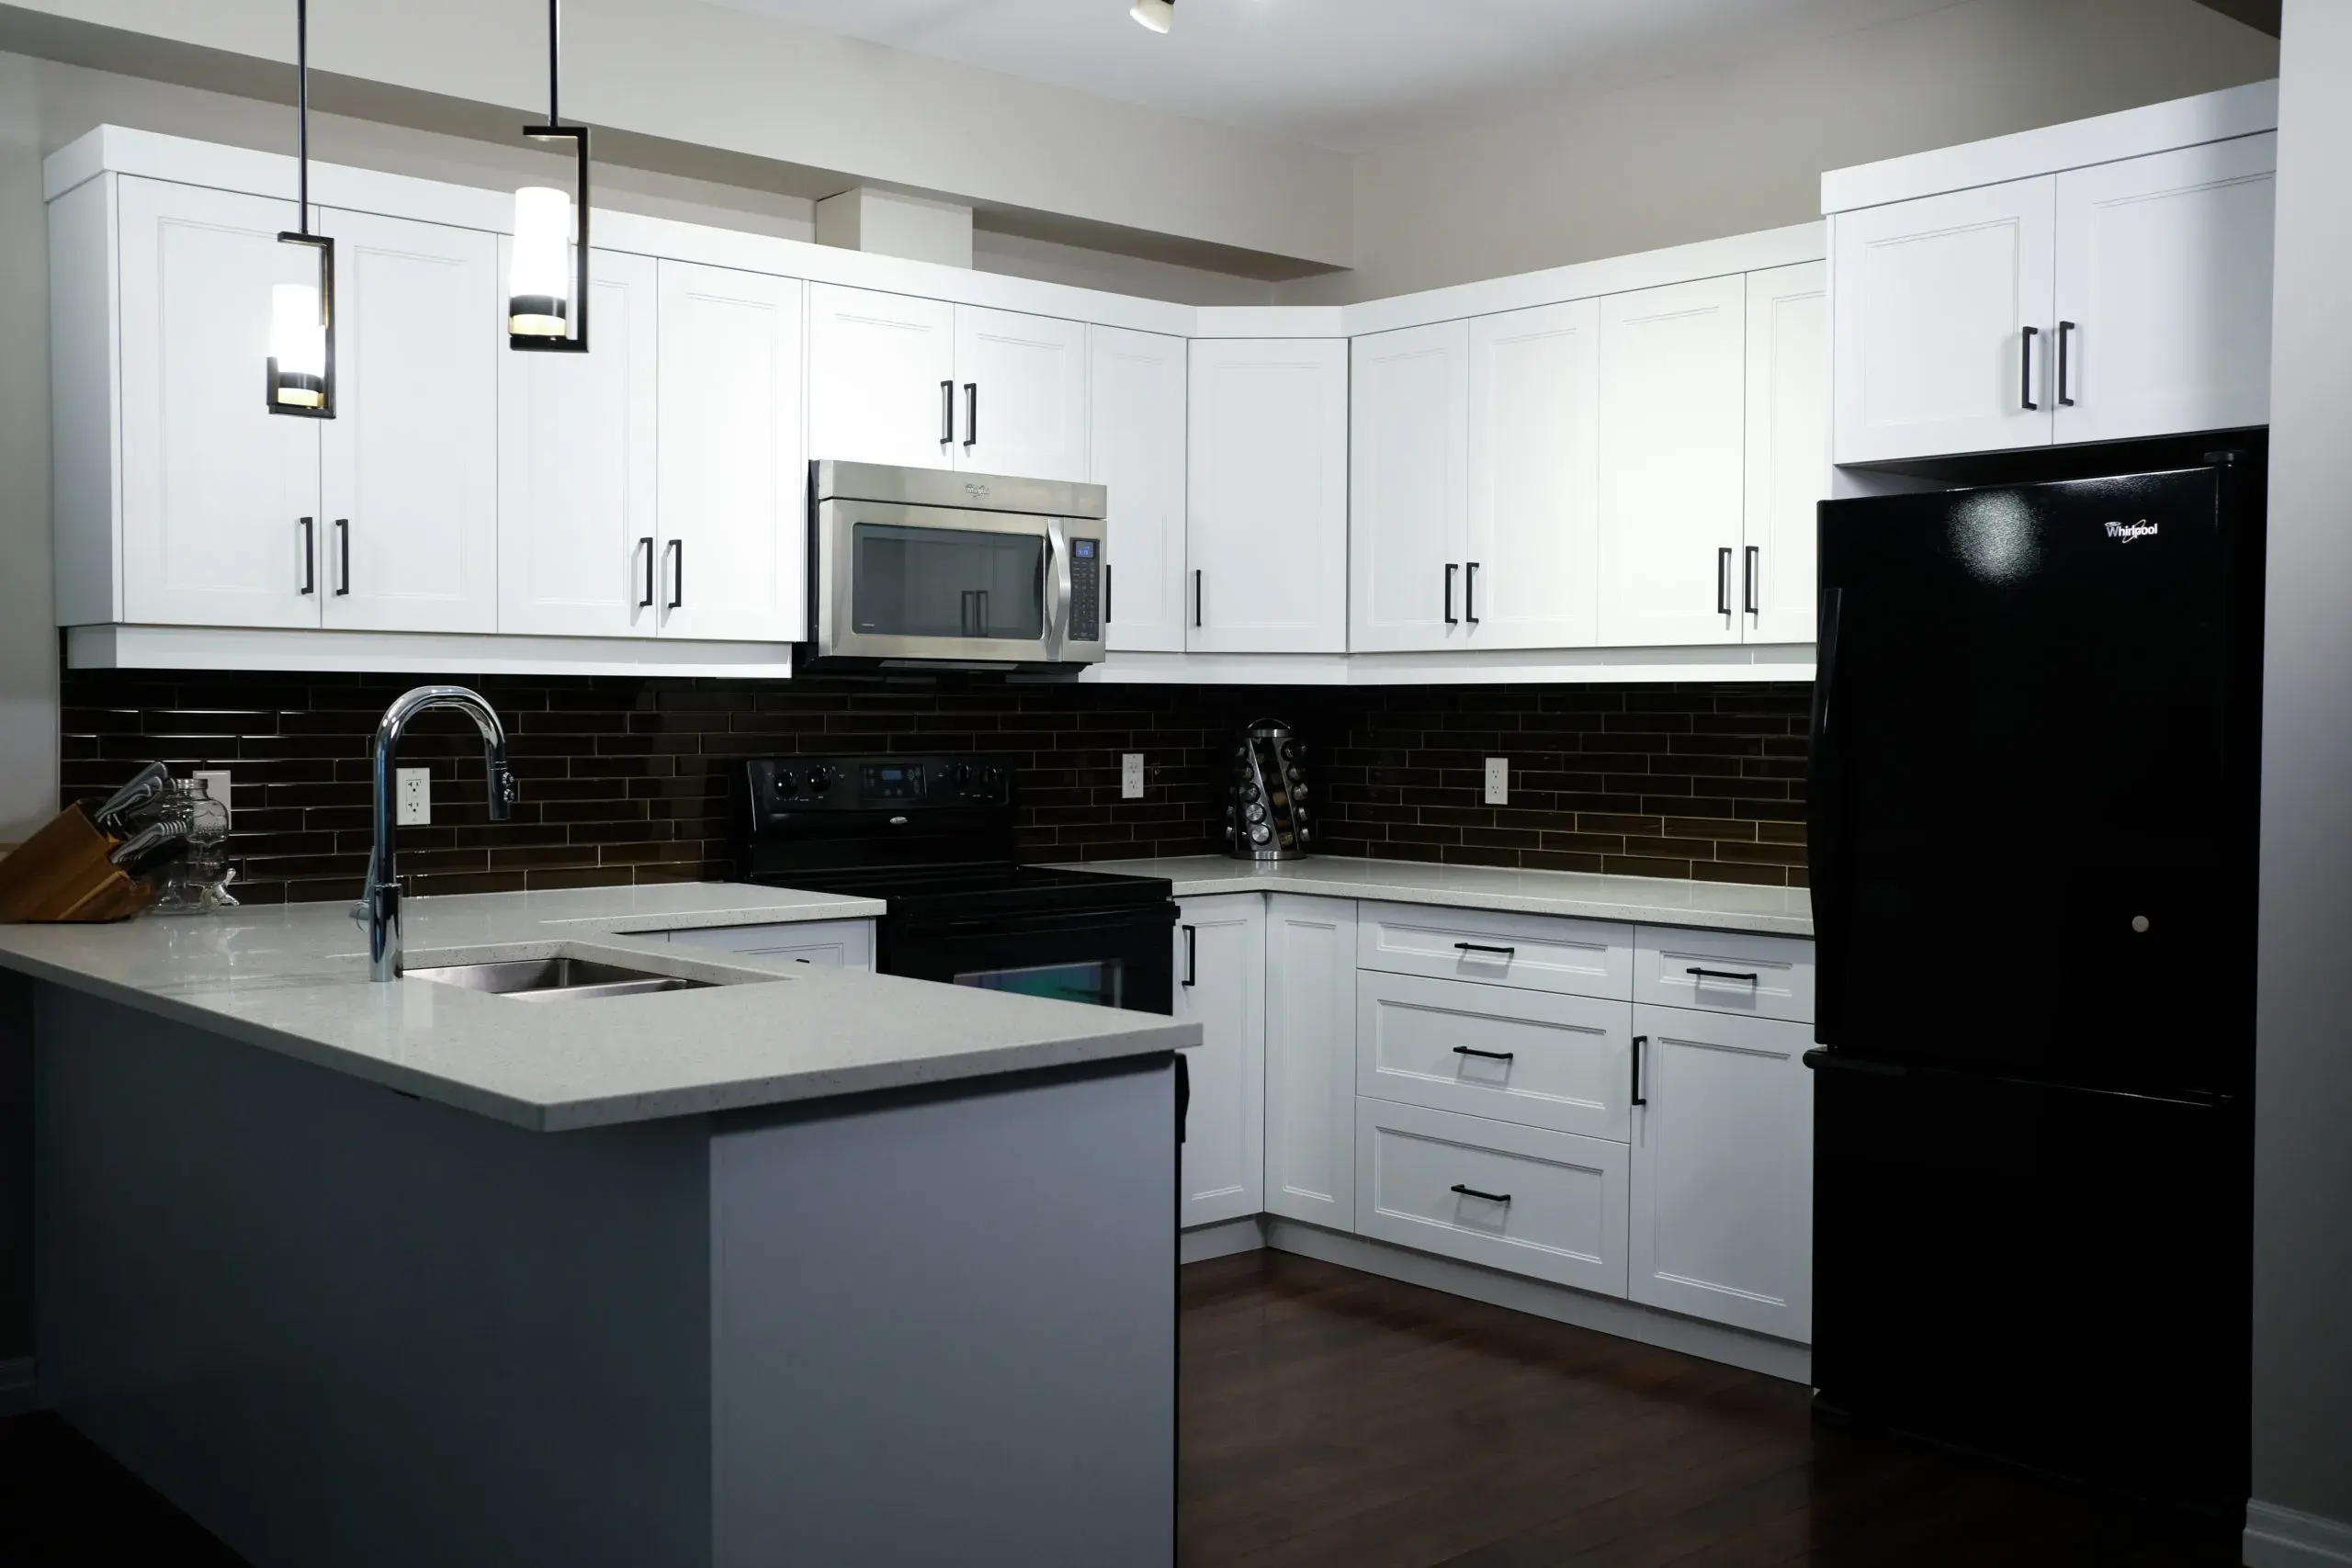 A photo of a kitchen with white shaker cabinet doors, black appliances, and quartz countertops.